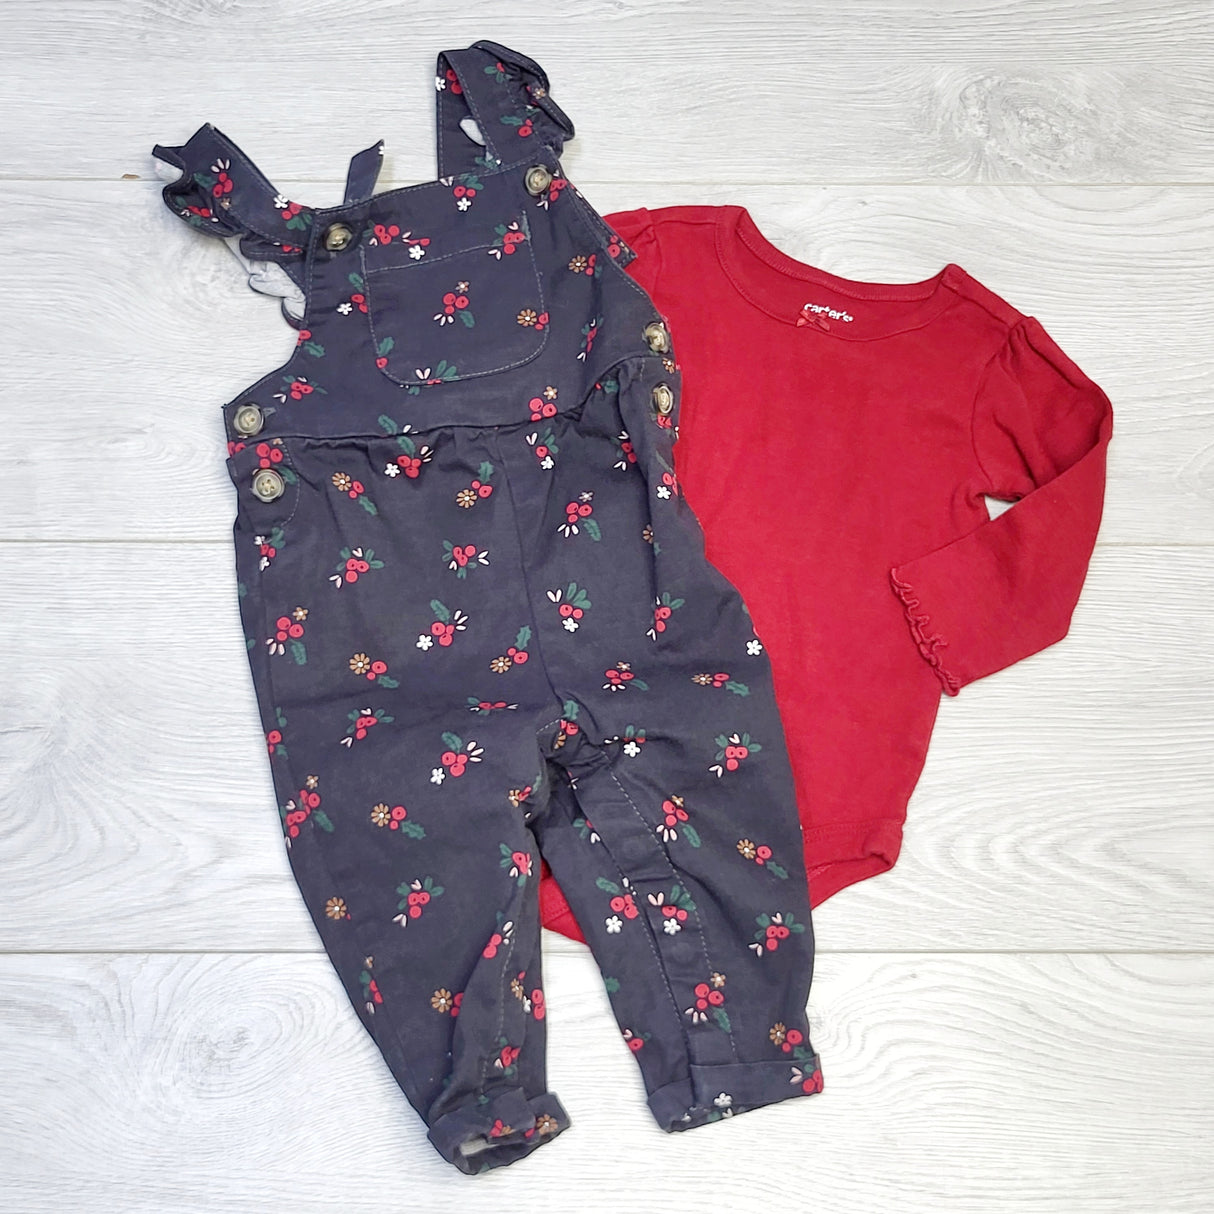 COWN1 - Carters 2pc overall set.  Size 6 months